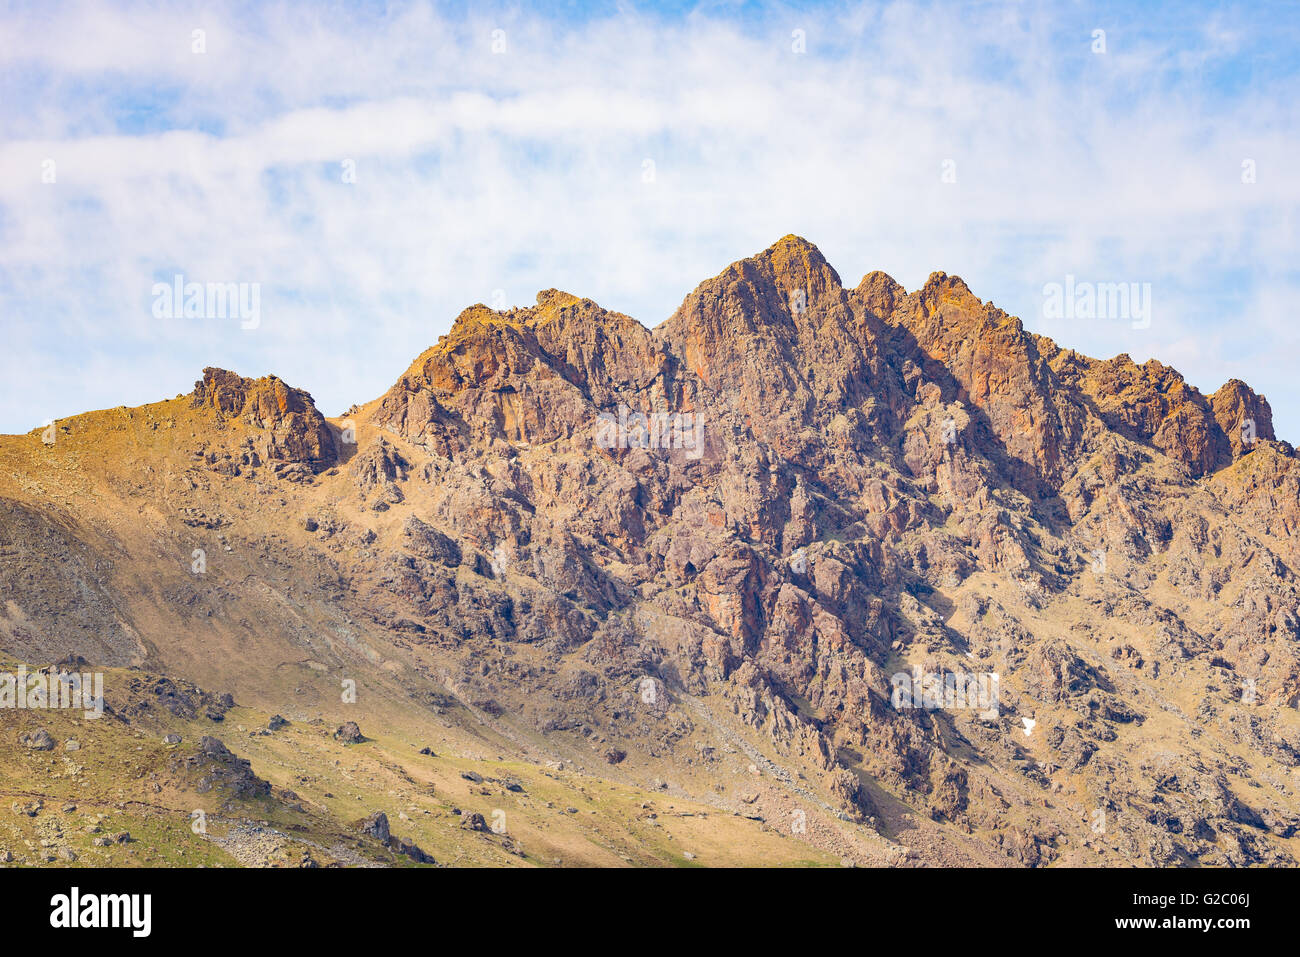 Telephoto detailed view of rocky mountain peak and jagged ridge. Extreme terrain landscape at high altitude on the Alps, Italy. Stock Photo